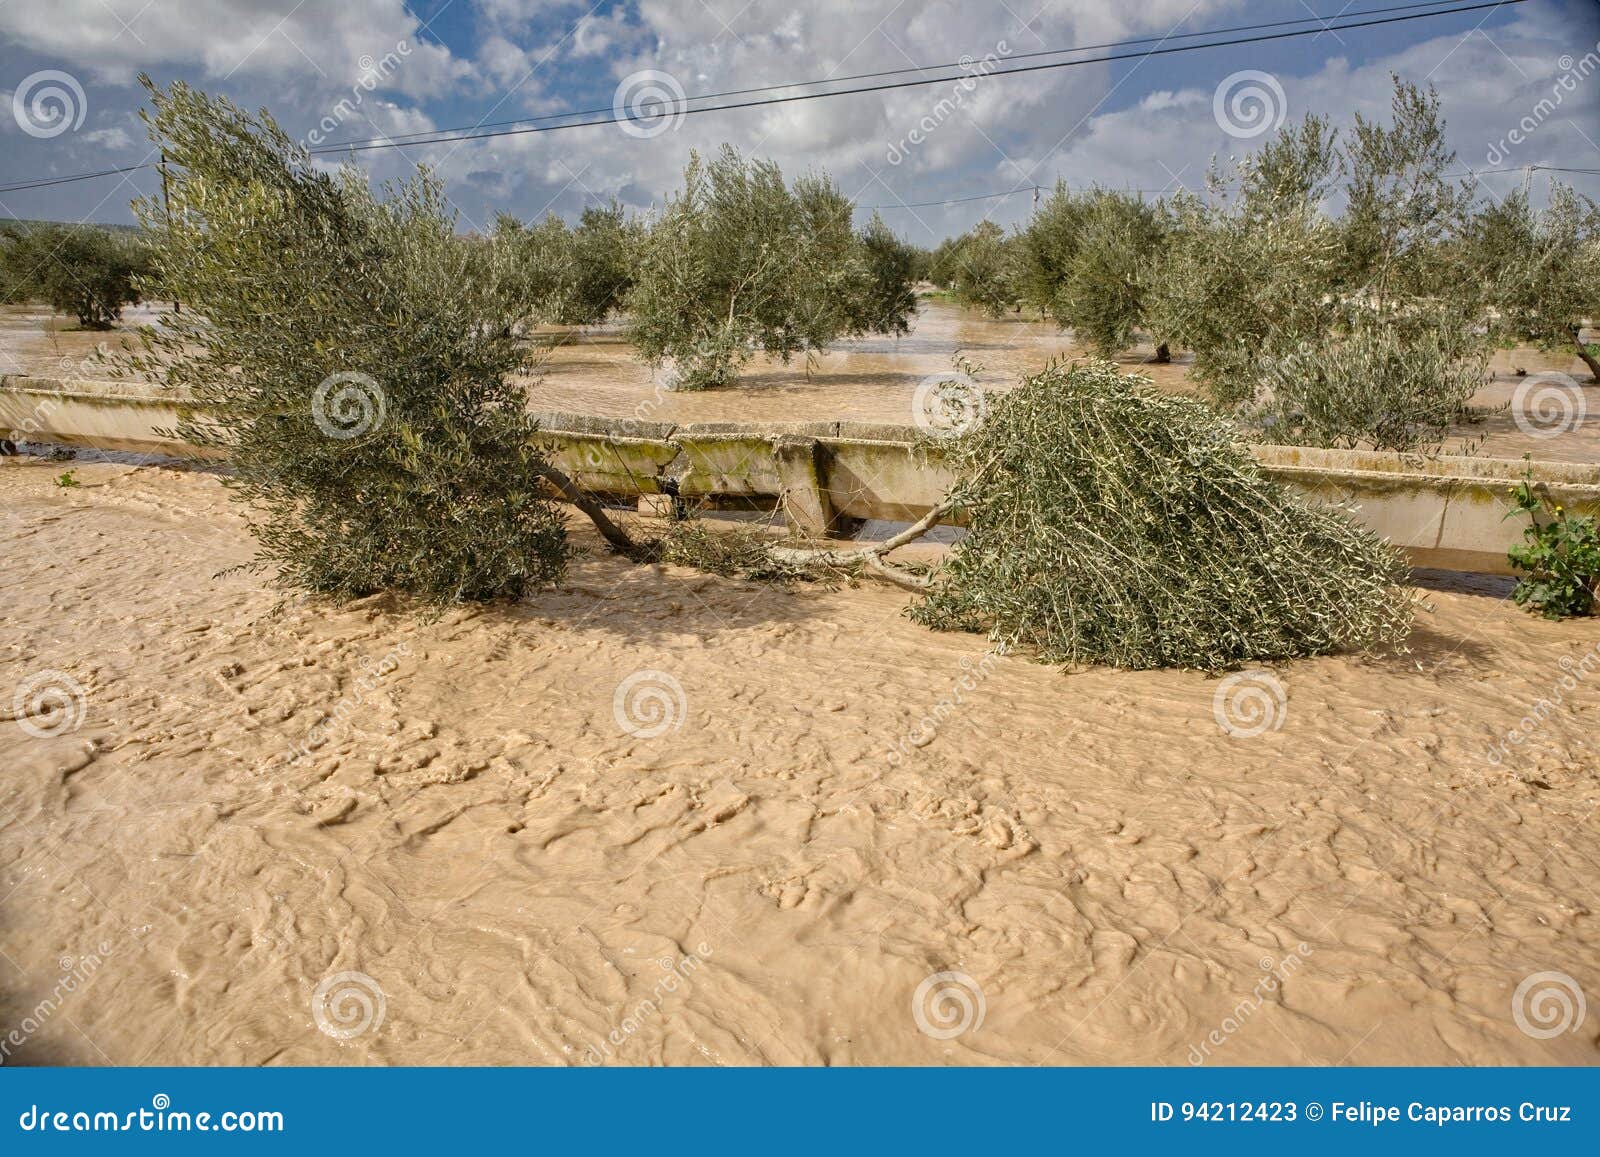 cultivation-of-olive-trees-flooded-by-heavy-rains-royalty-free-stock